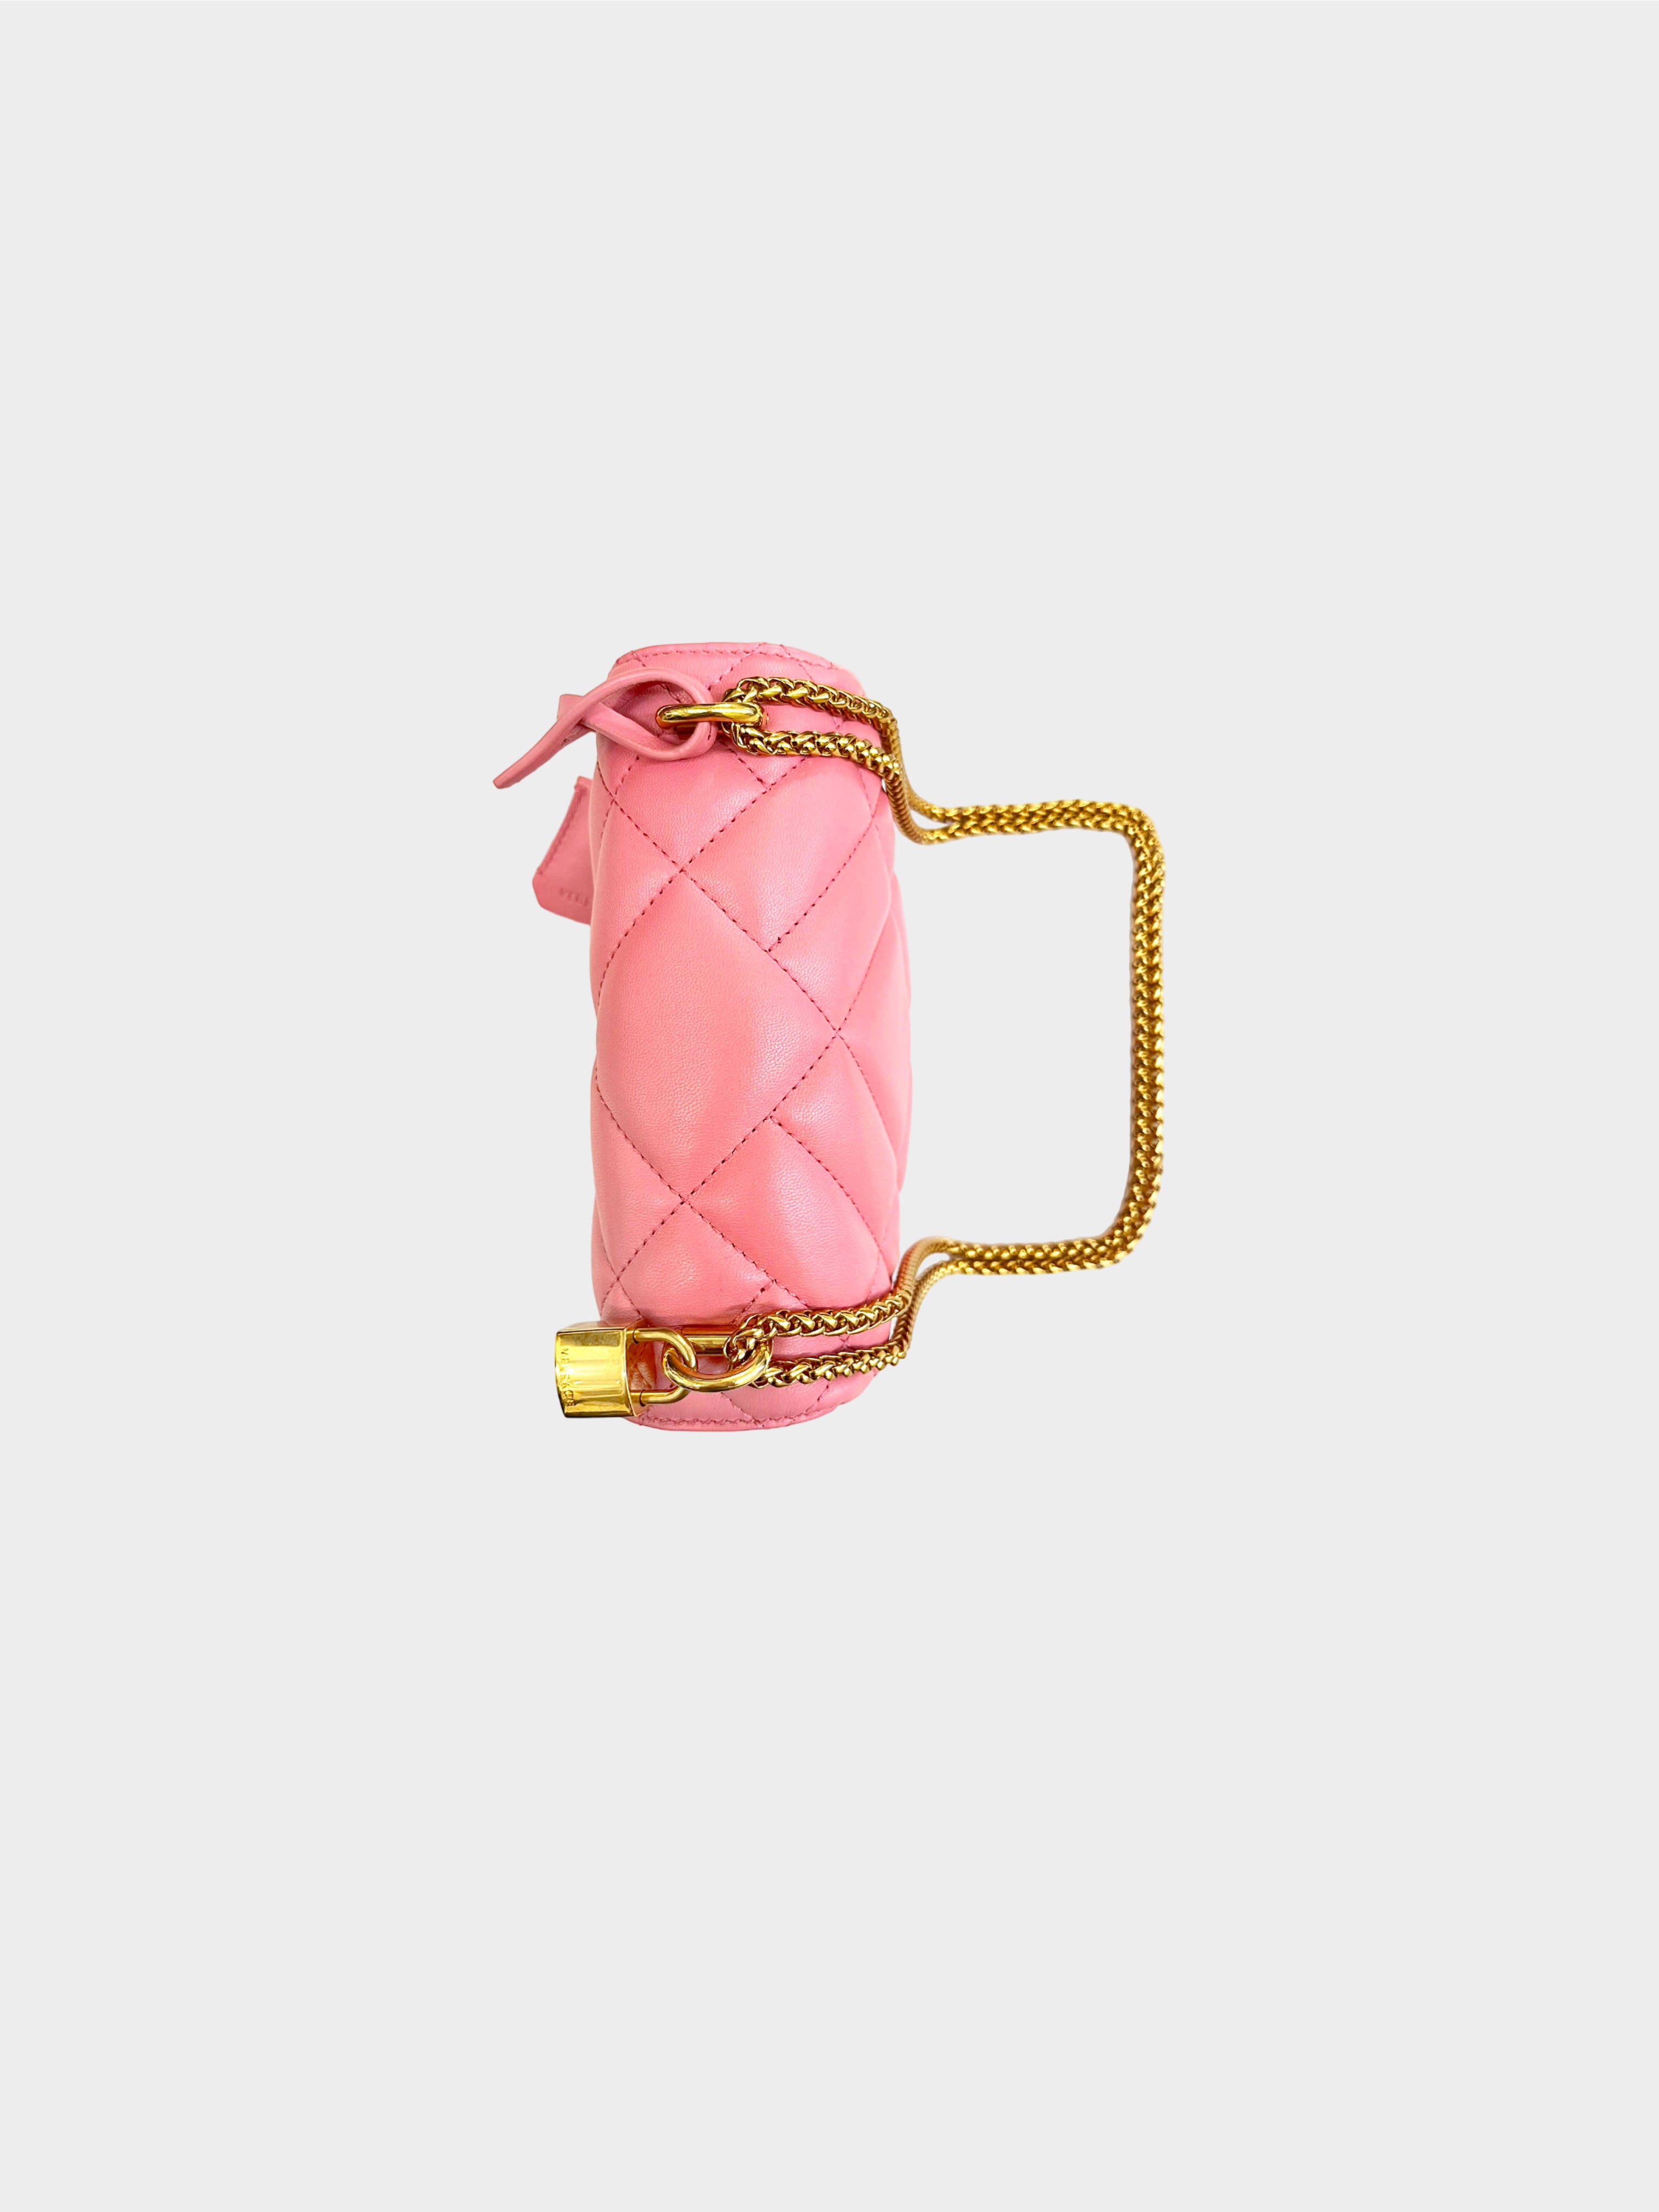 Versace 2010s Pink Quilted Leather Medusa Flap Bag